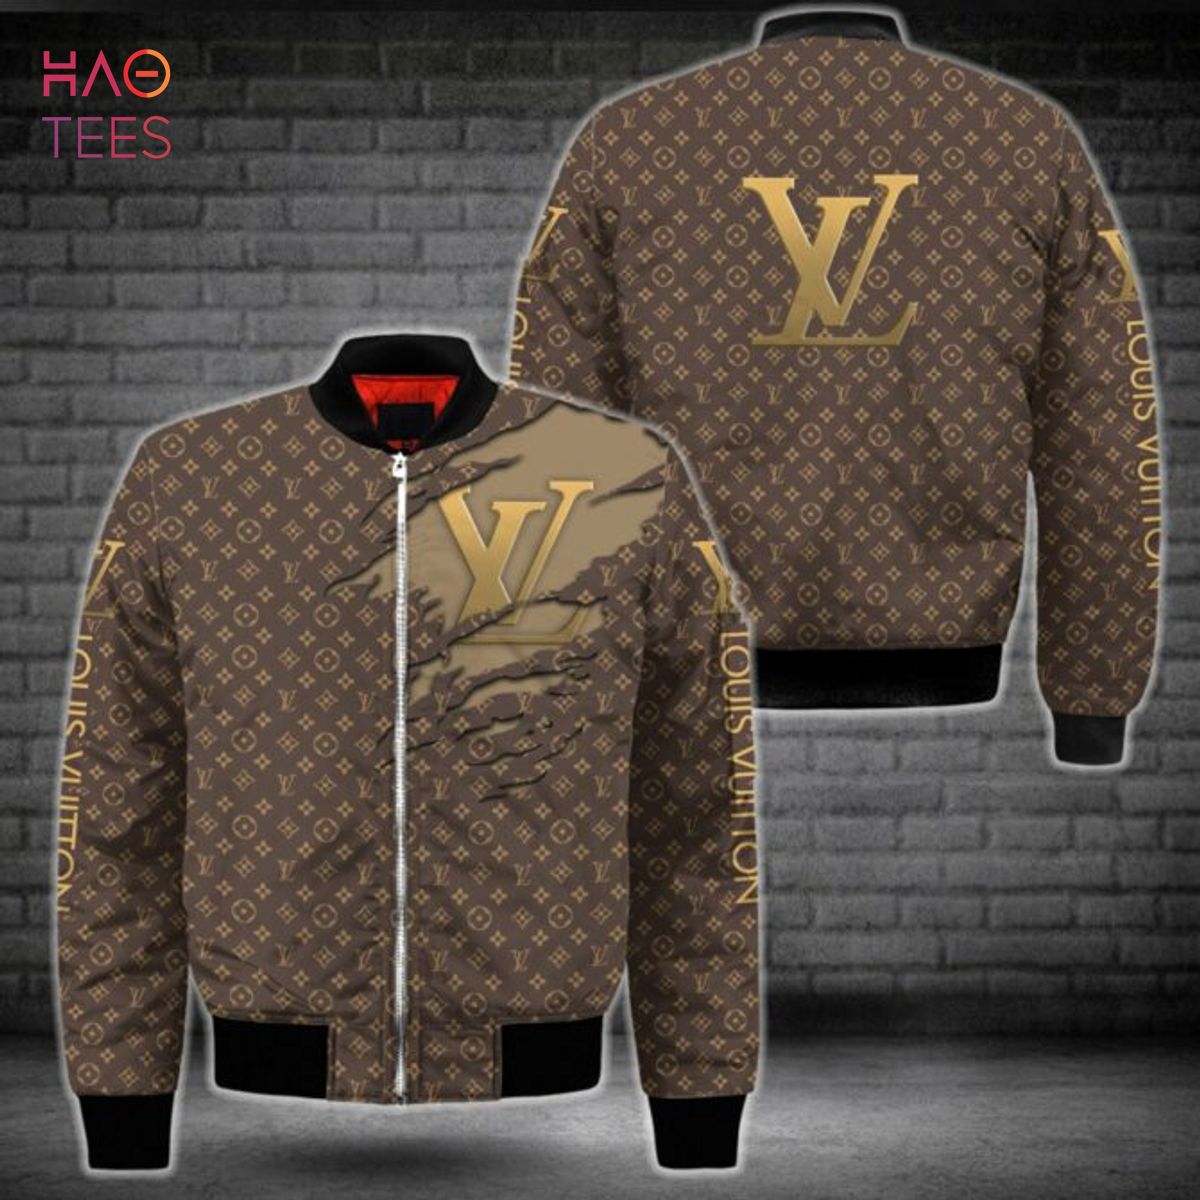 Louis Vuitton Leather Bomber Jacket - LIMITED EDITION